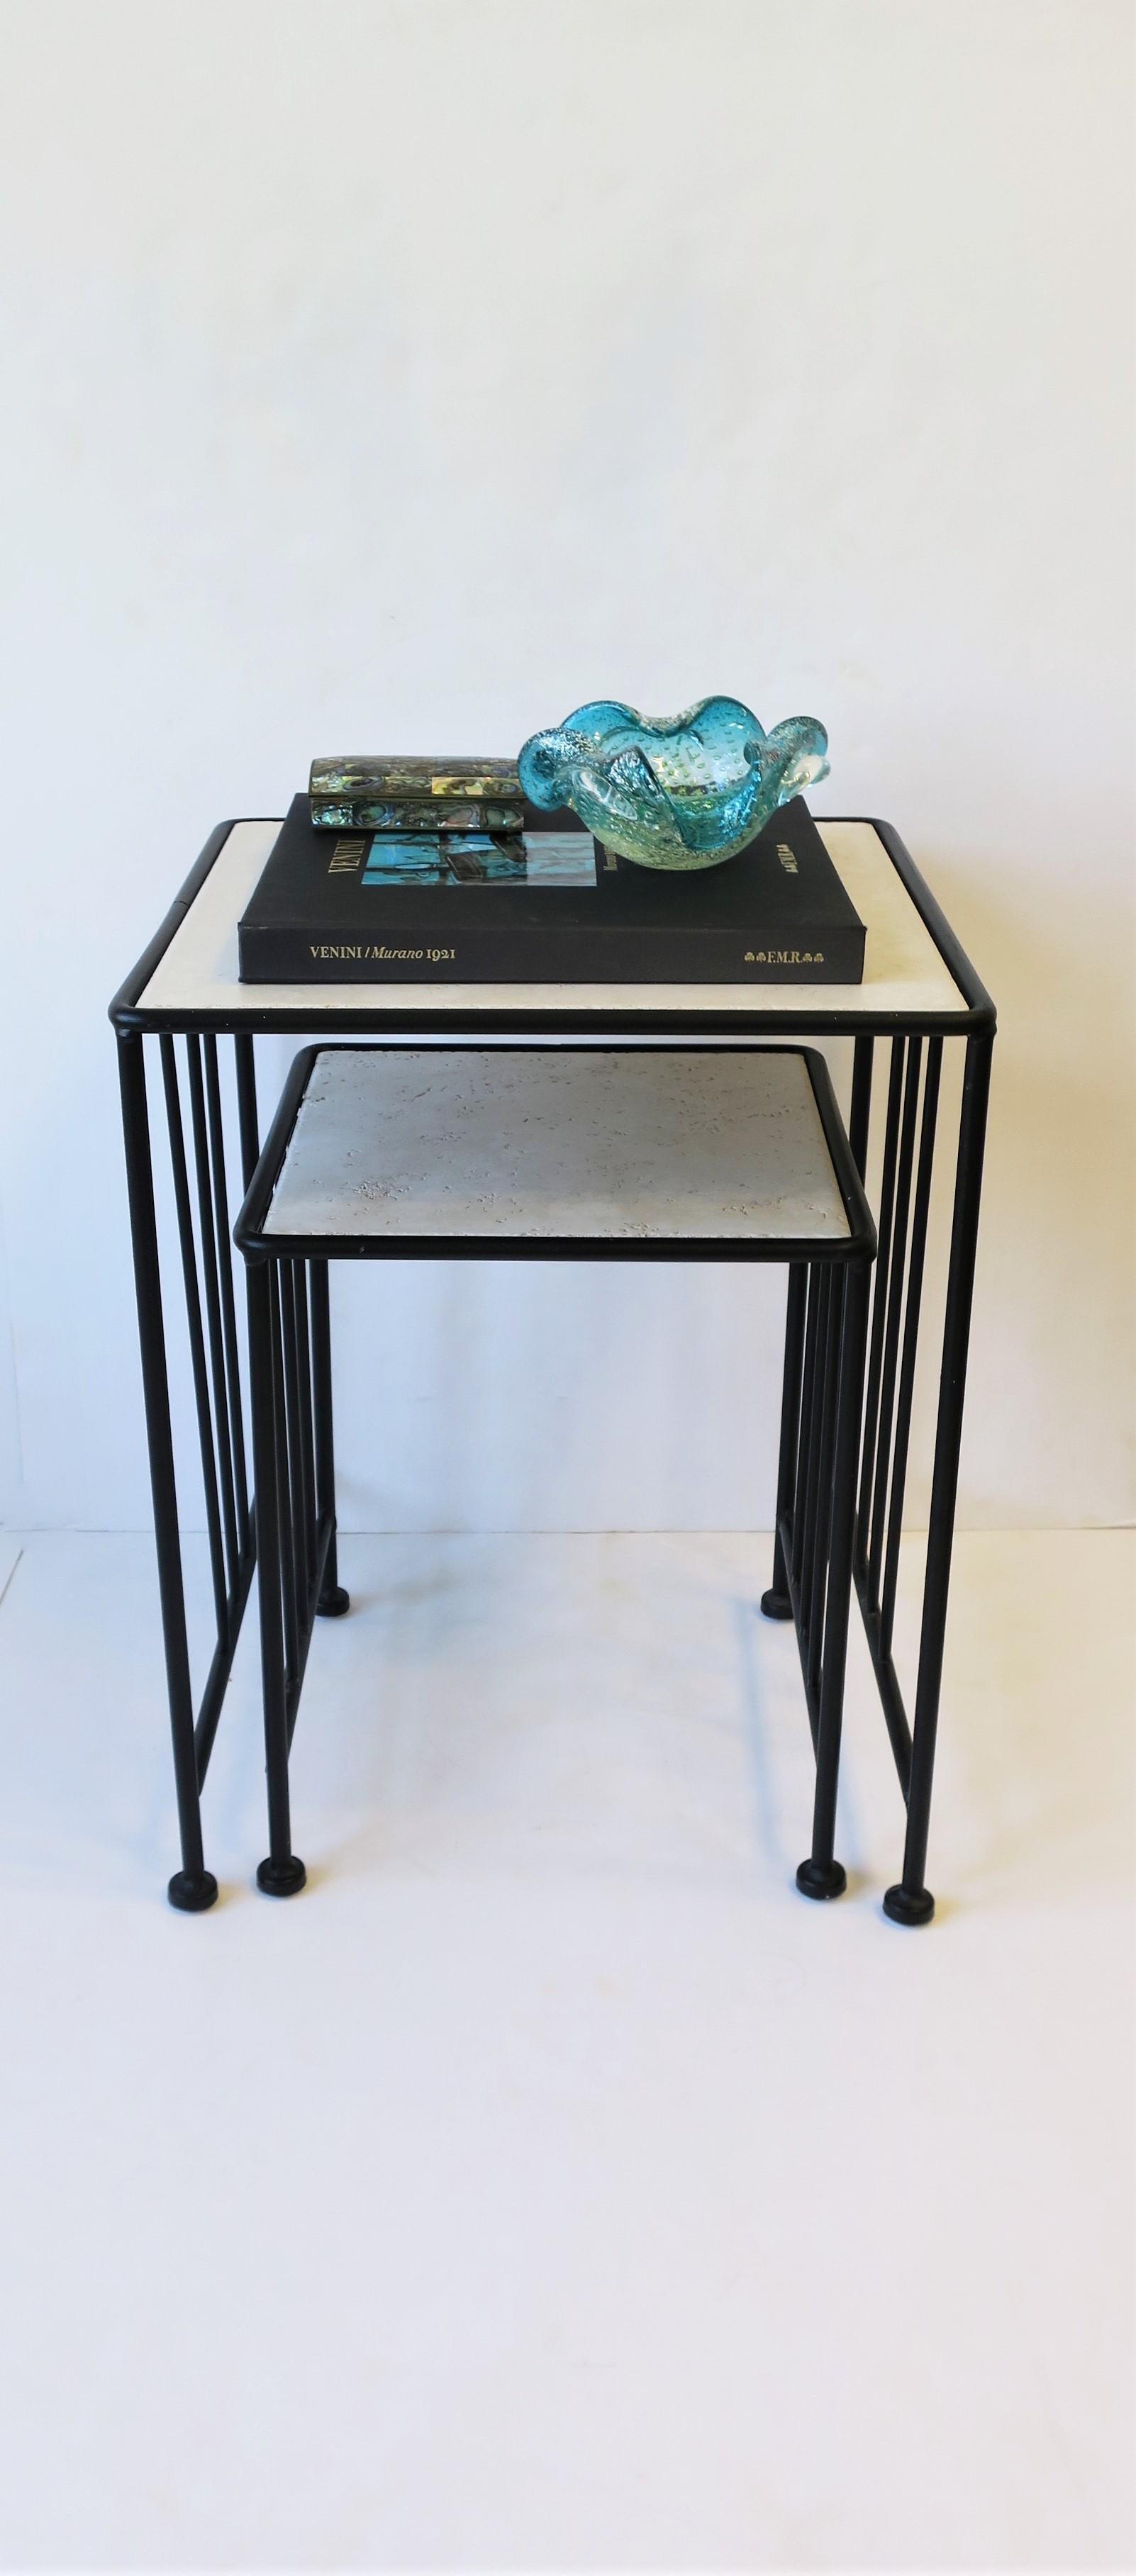 Ceramic Italian Black End or Nesting Tables in the Art Deco Bauhaus Style For Sale